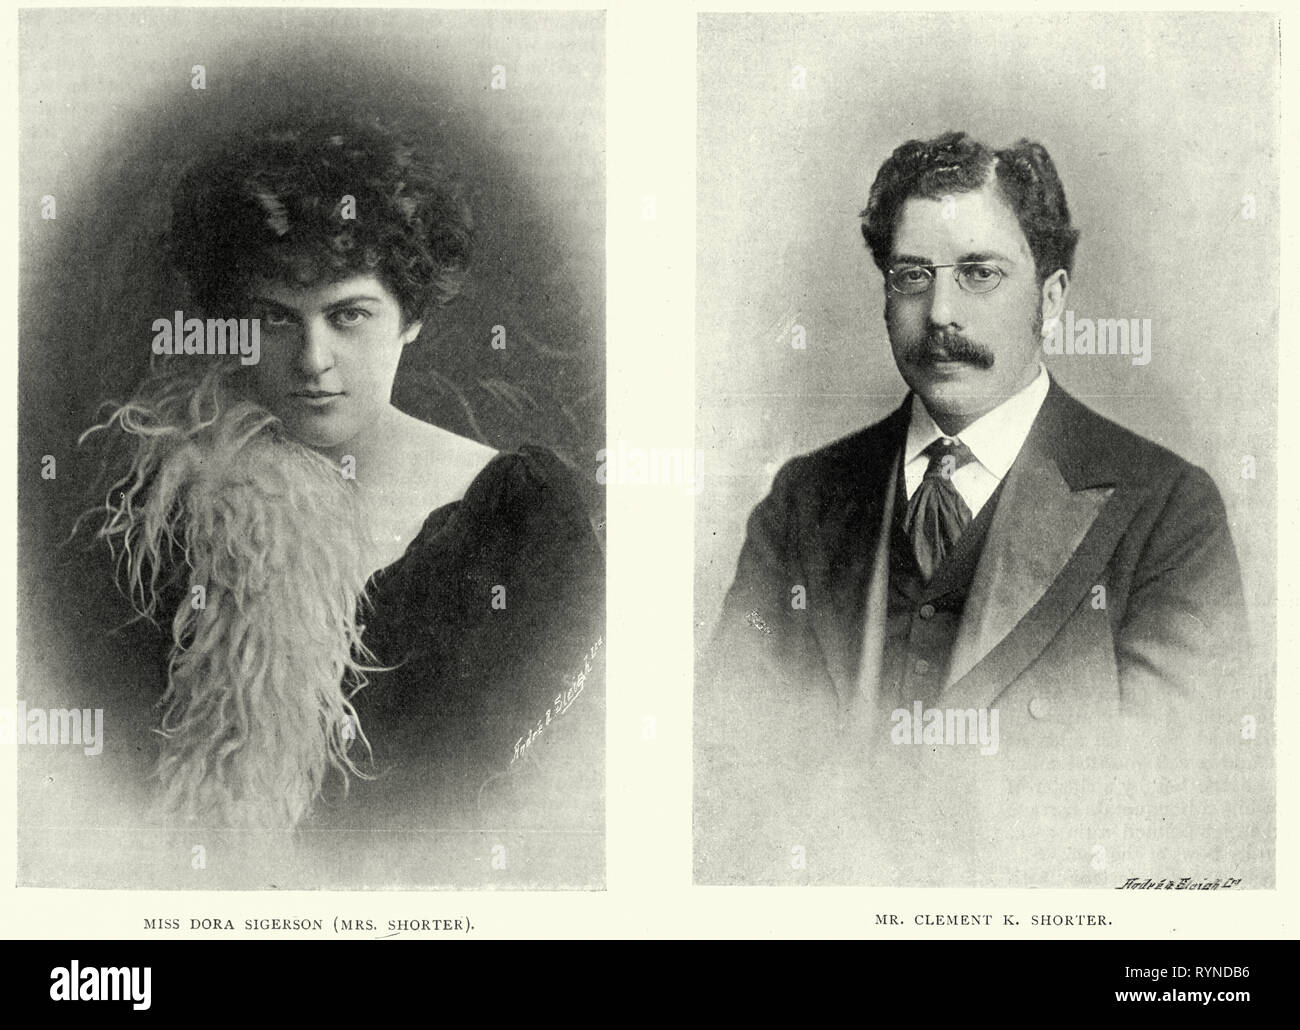 Vintage photograph of Clement King Shorter and his wife Dora Sigerson 1890s. Clement King Shorter (19 July 1857 – 19 November 1926) was a British journalist and literary critic. Dora Maria Sigerson Shorter (16 August 1866 – 6 January 1918) was an Irish poet and sculptor Stock Photo